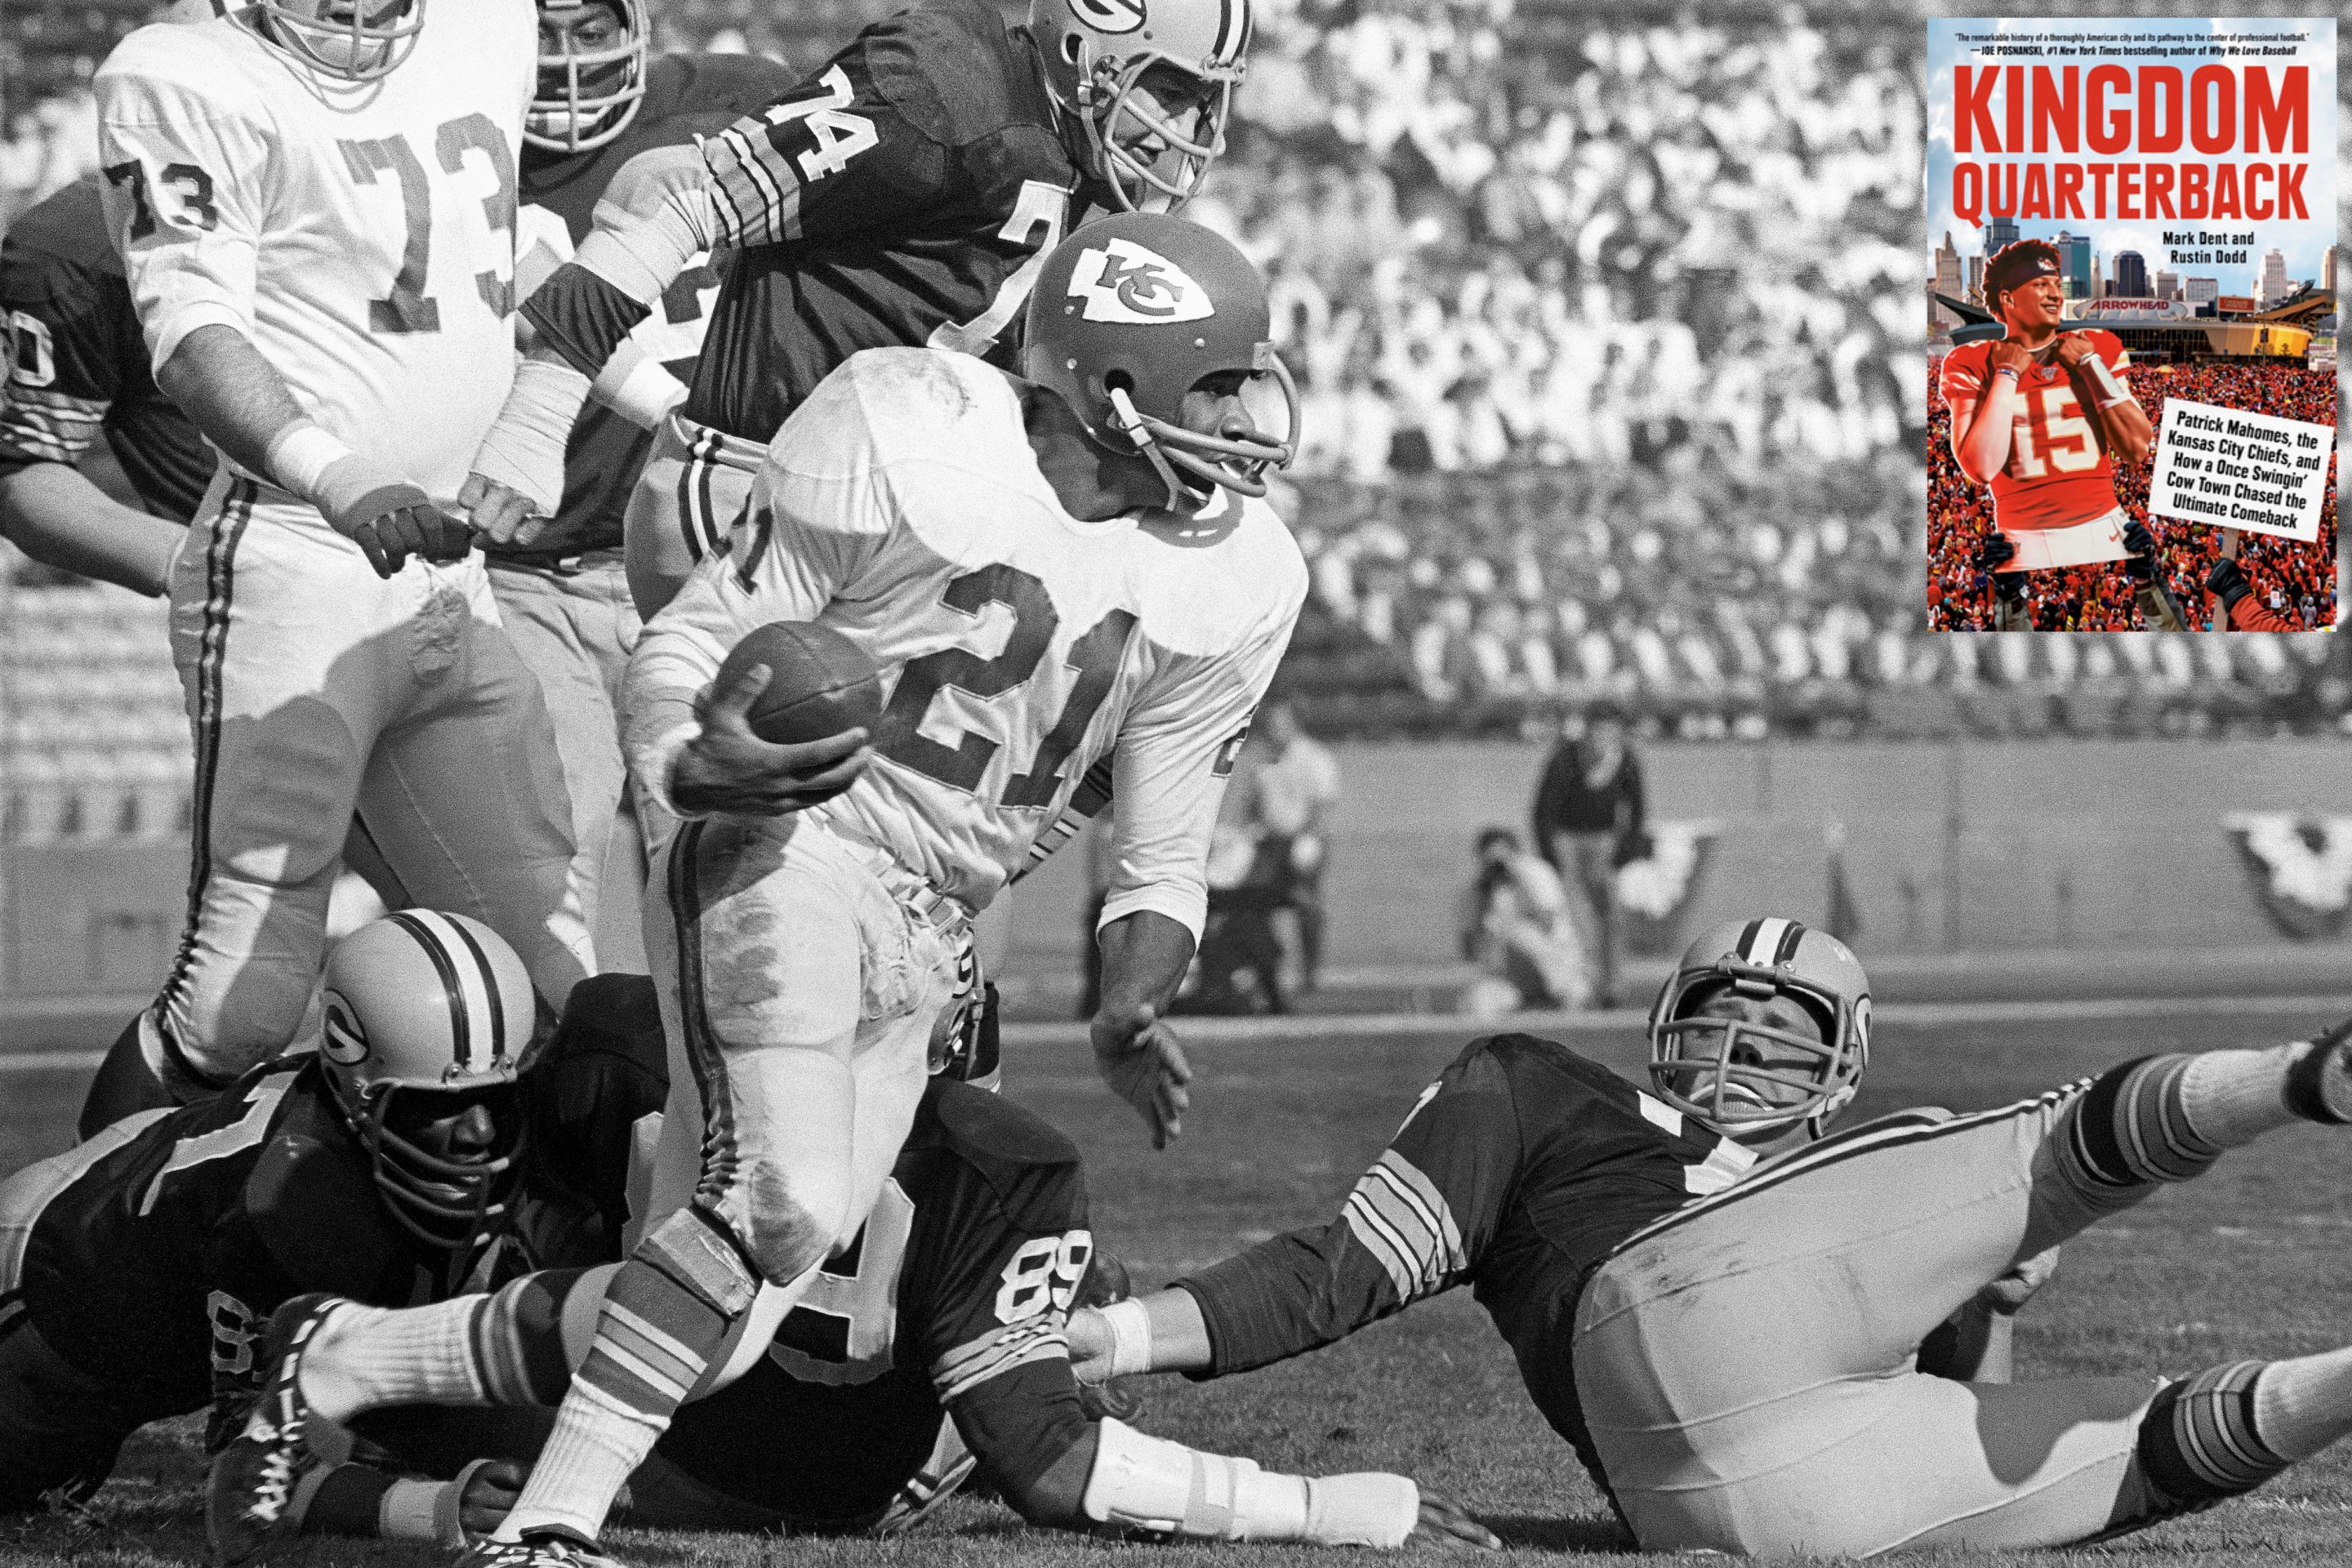 Mike Garrett of the Kansas City Chiefs rushing against the Green Bay Packers in Super Bowl I, on Jan. 15, 1967.